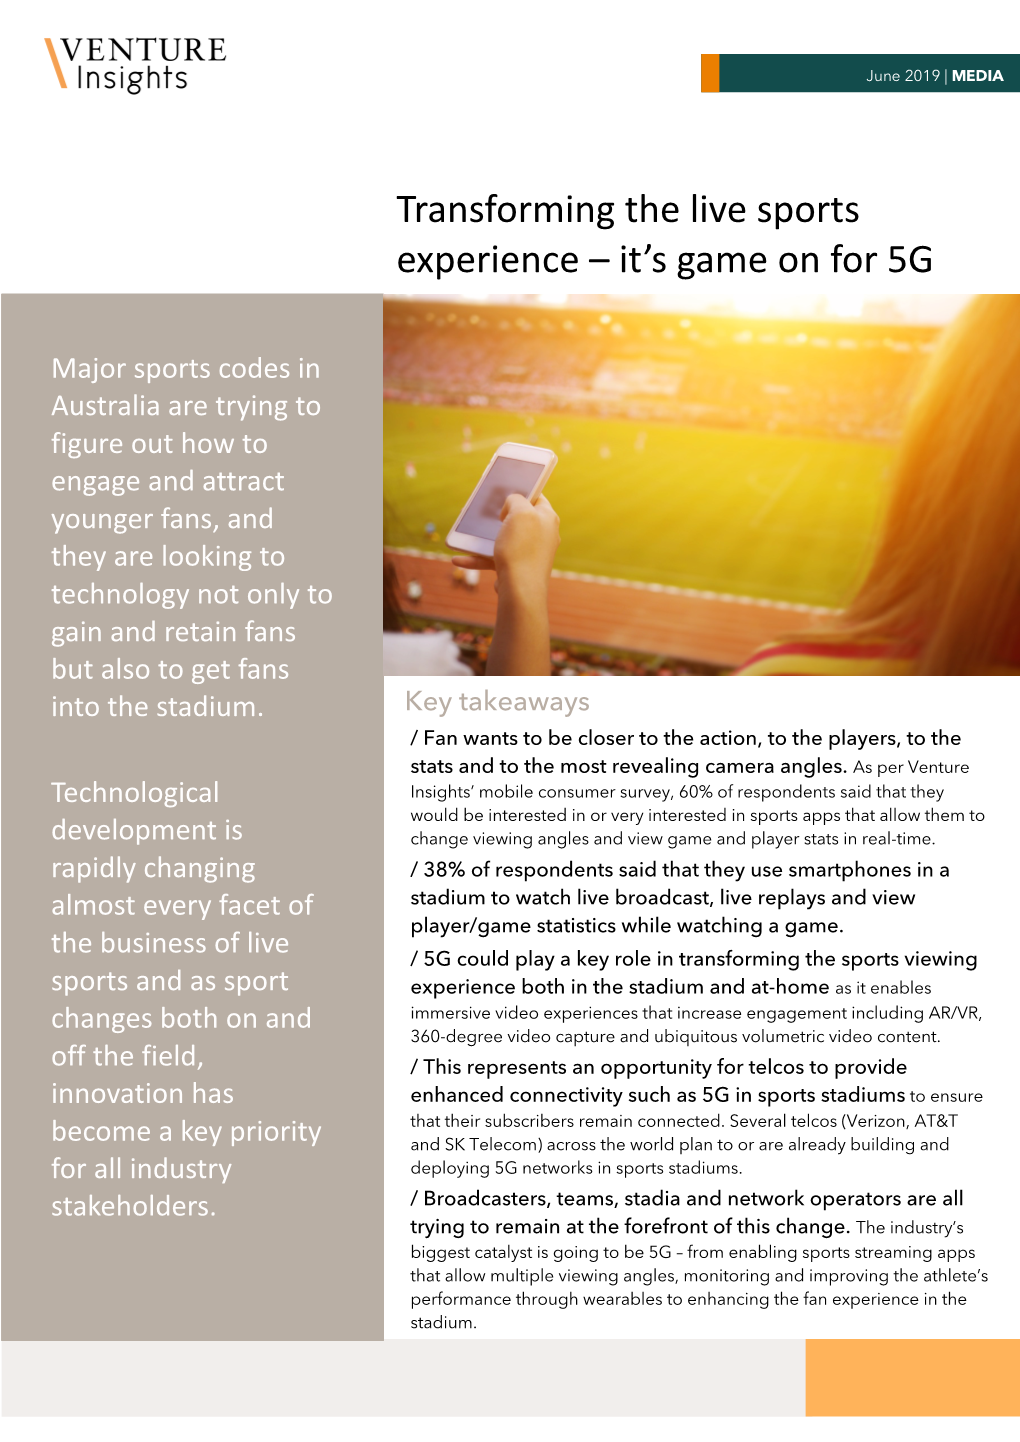 Transforming the Live Sports Experience – It's